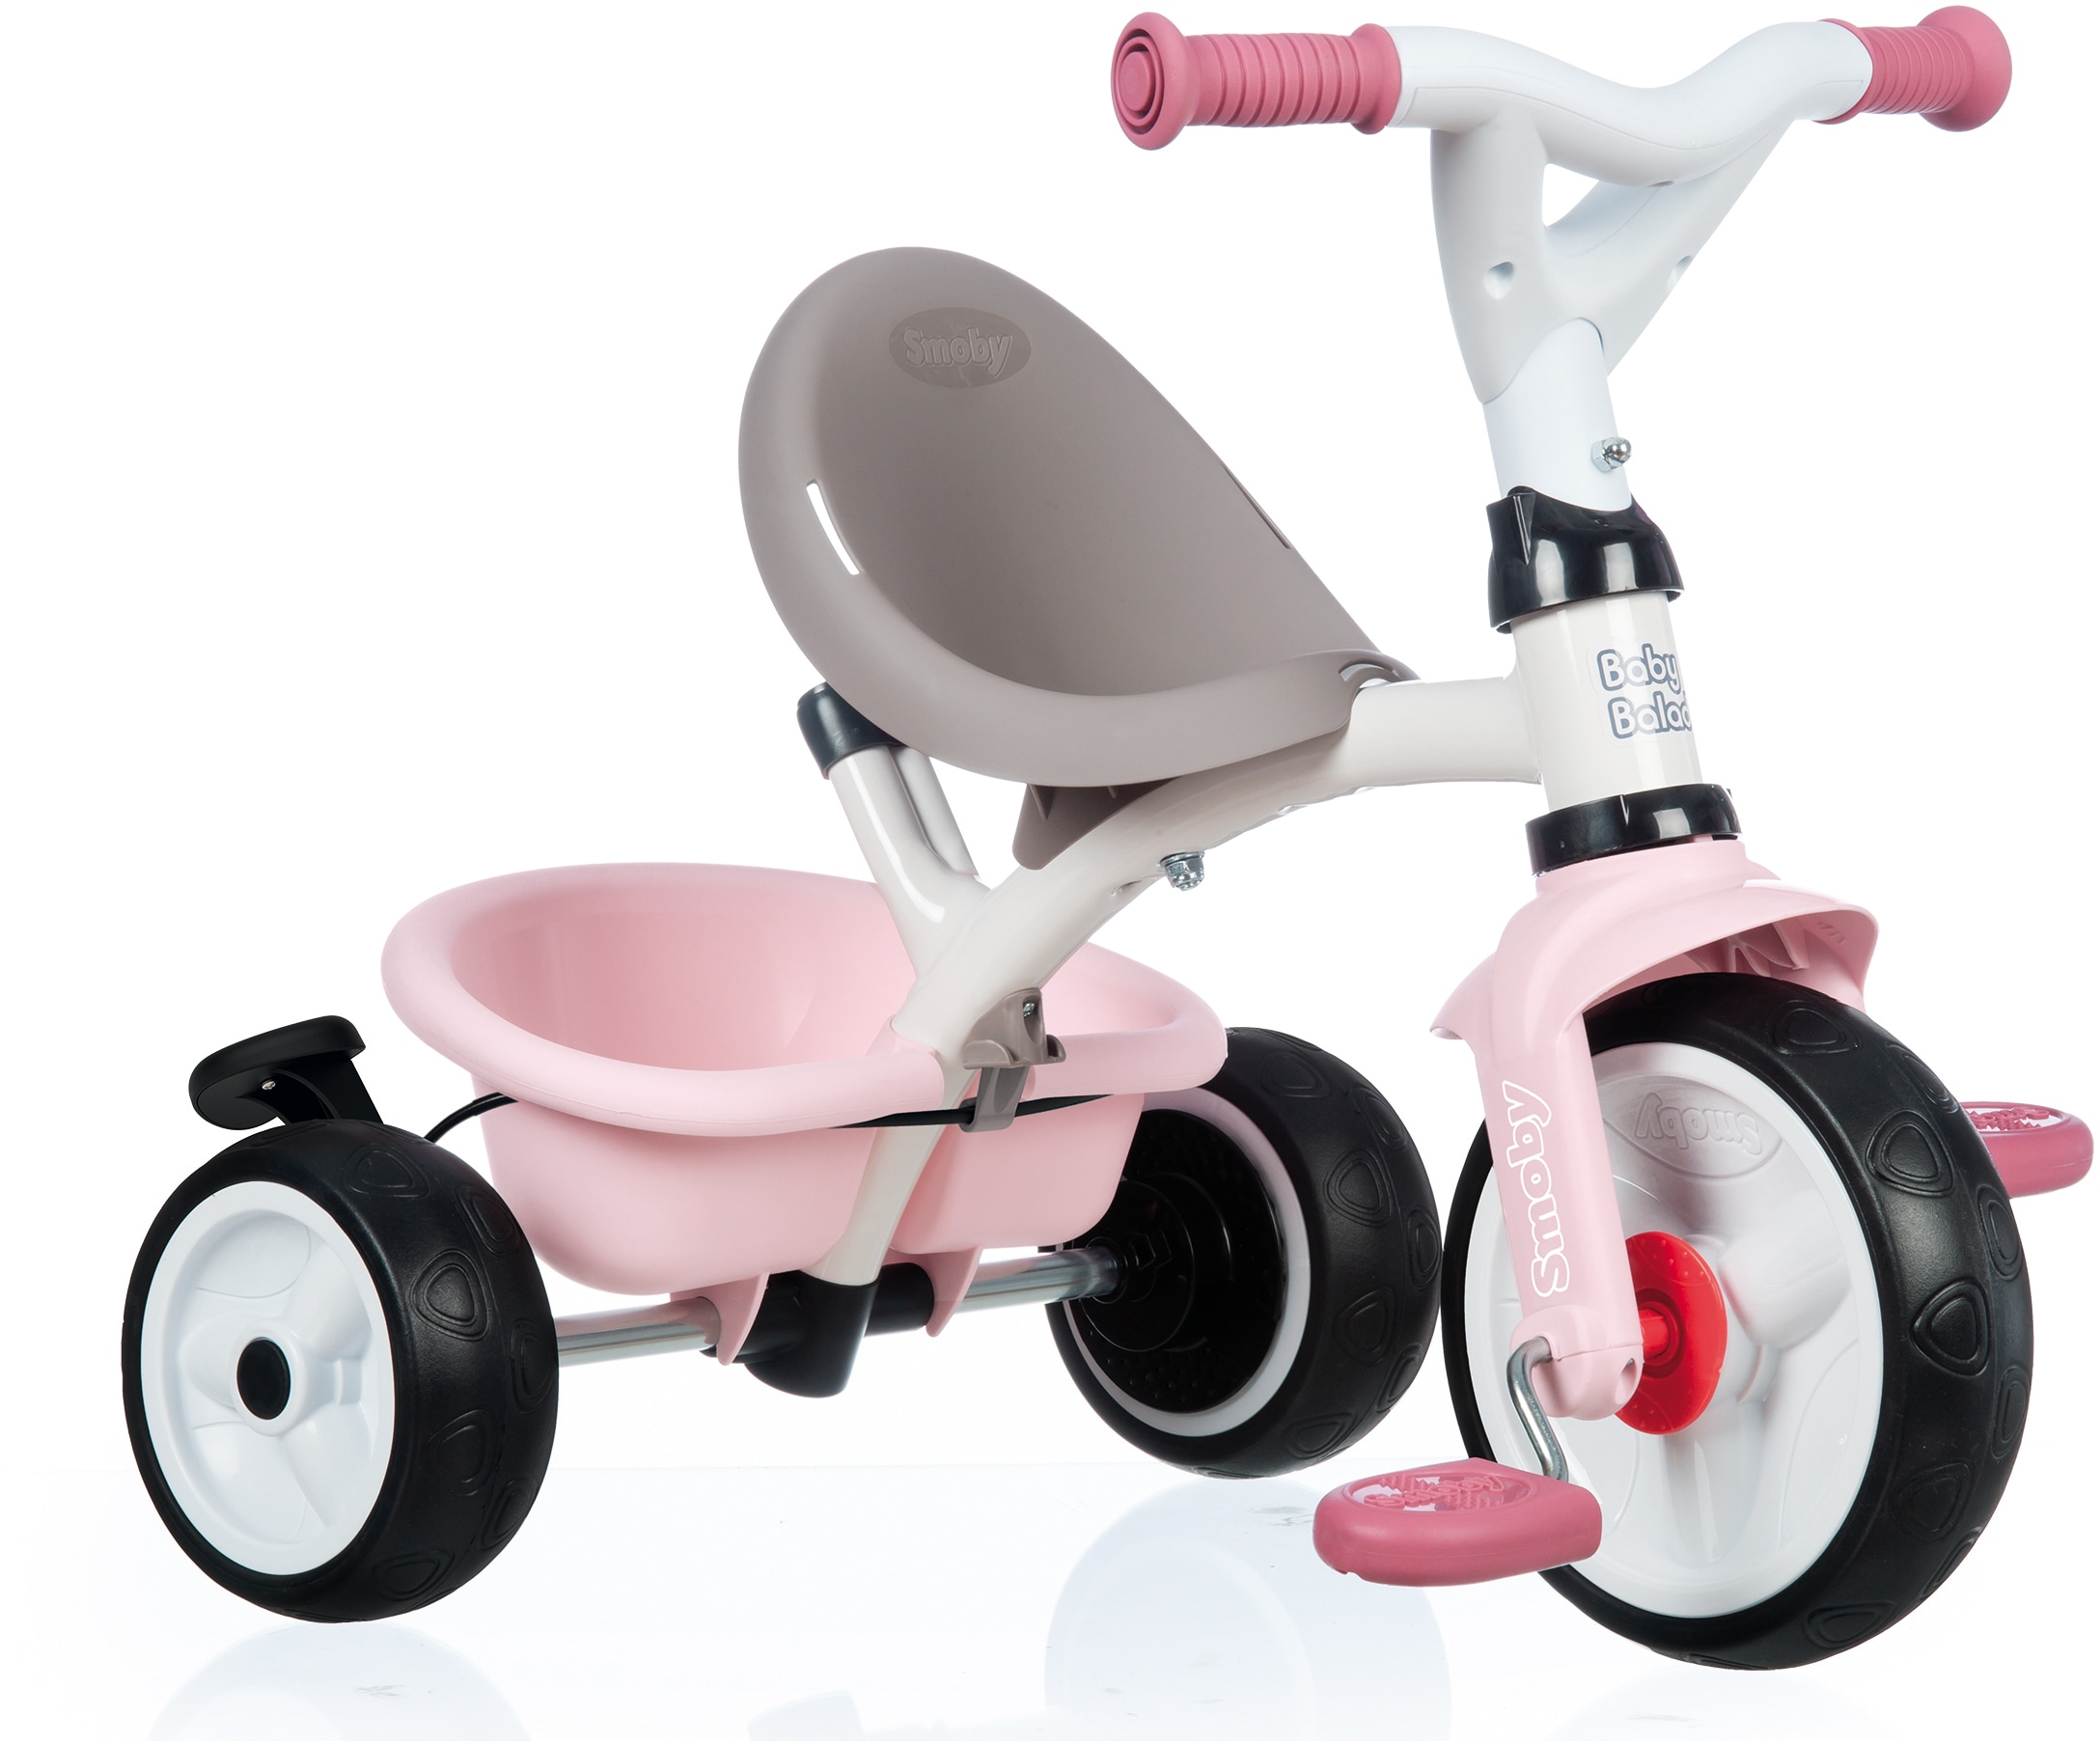 Smoby Dreirad »Baby Balade Plus, mit Made Europe bei Sonnendach; in rosa«